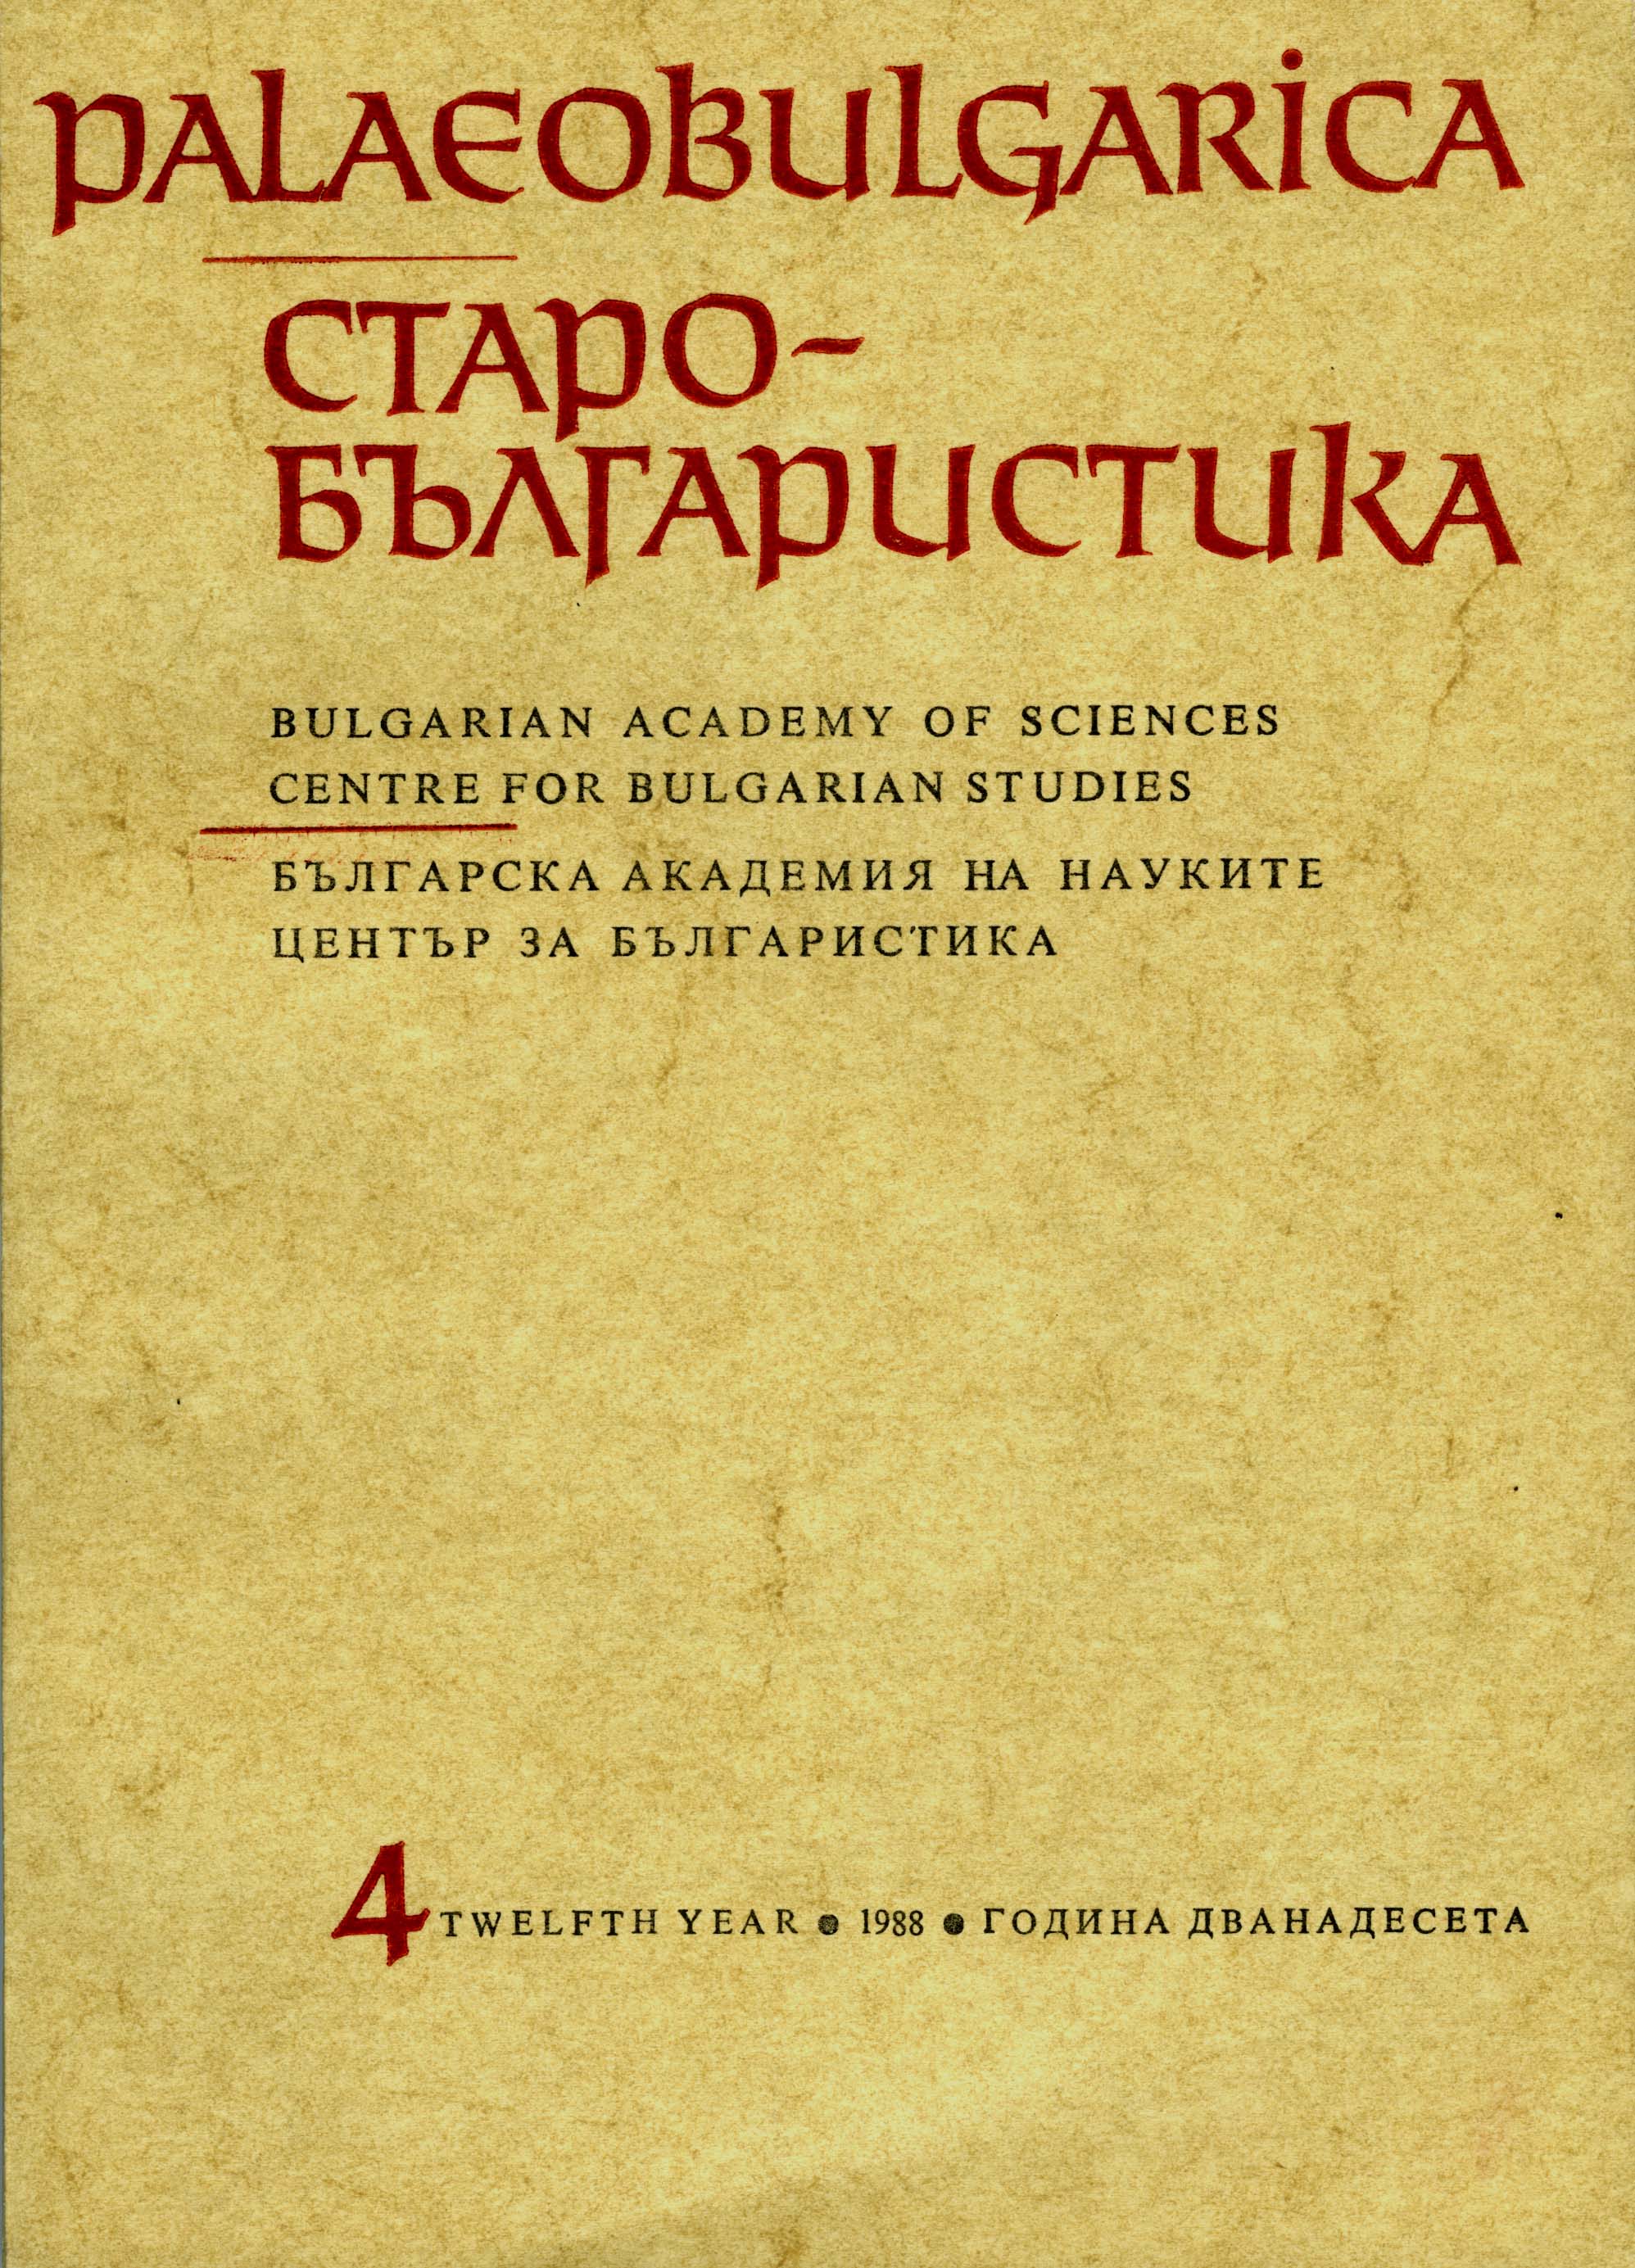 Diplomatic Documents from the Second Bulgarian State Cover Image